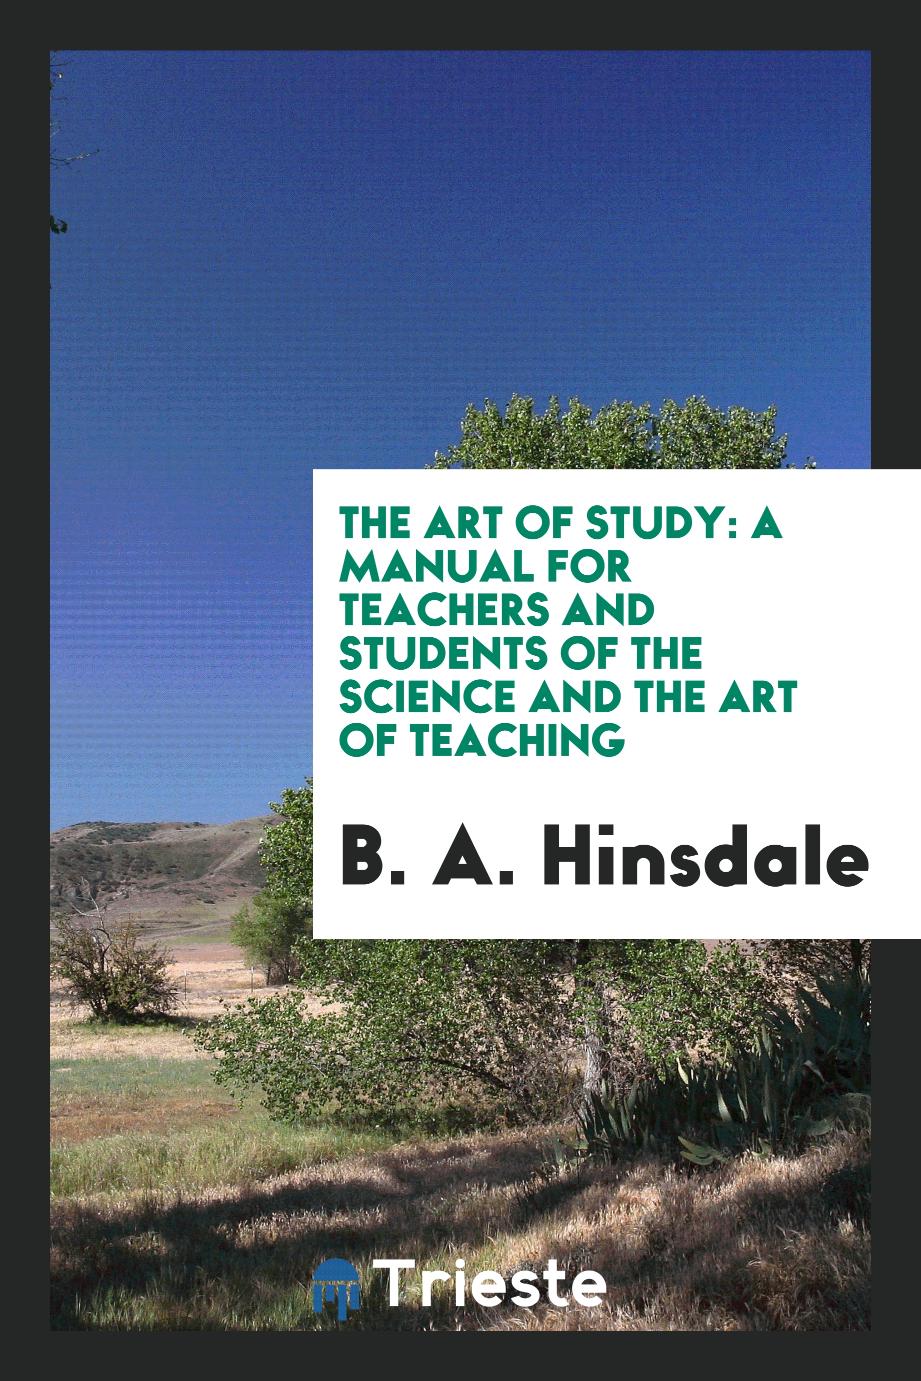 The art of study: a manual for teachers and students of the science and the art of teaching